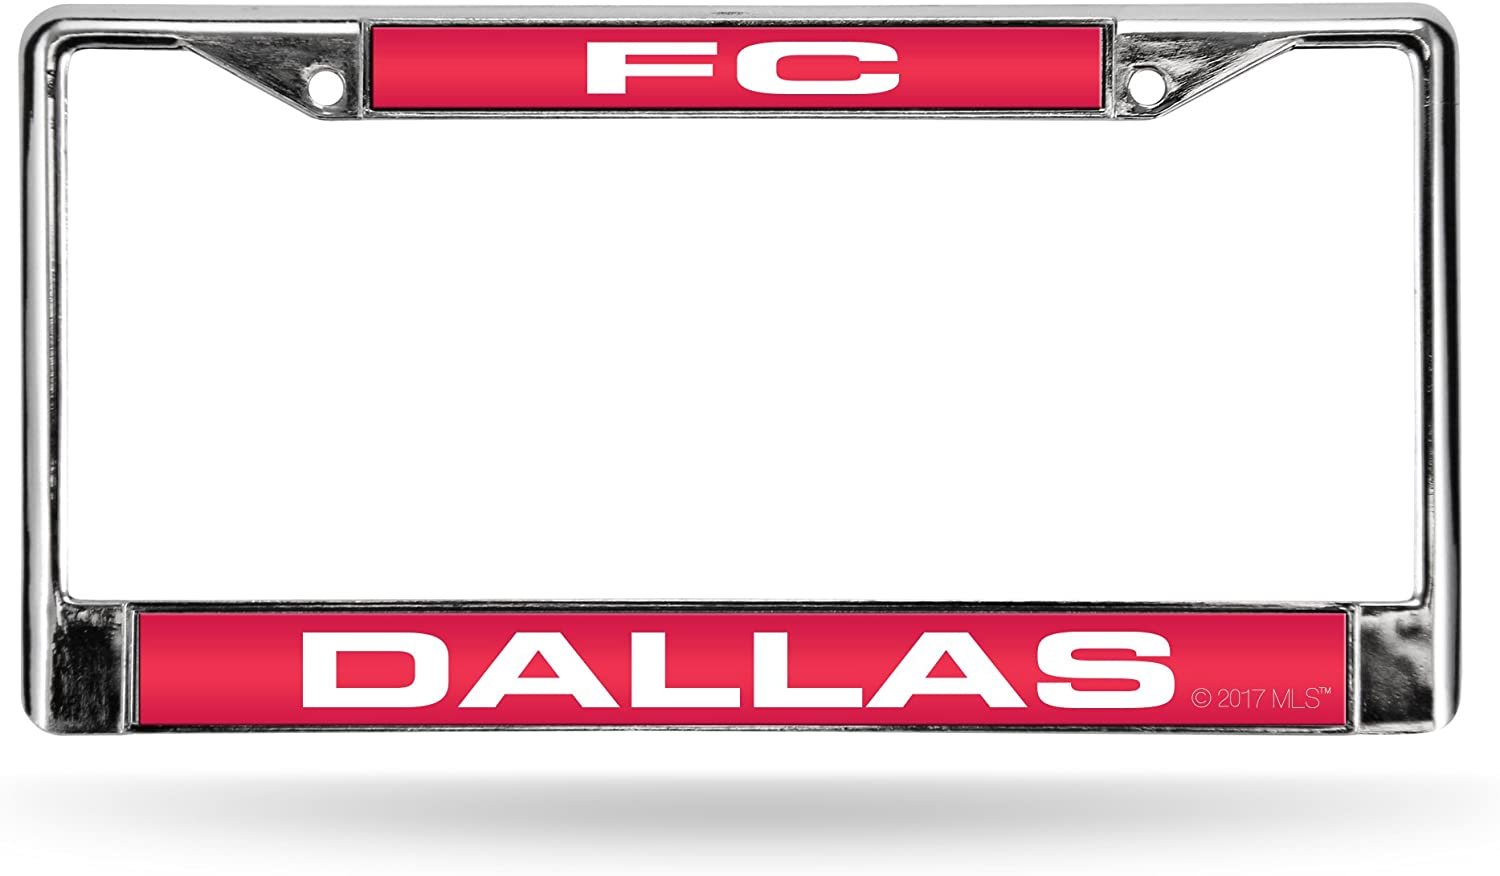 FC Dallas Metal License Plate Frame Chrome Tag Cover, Laser Acrylic Mirrored Inserts, 12x6 Inch